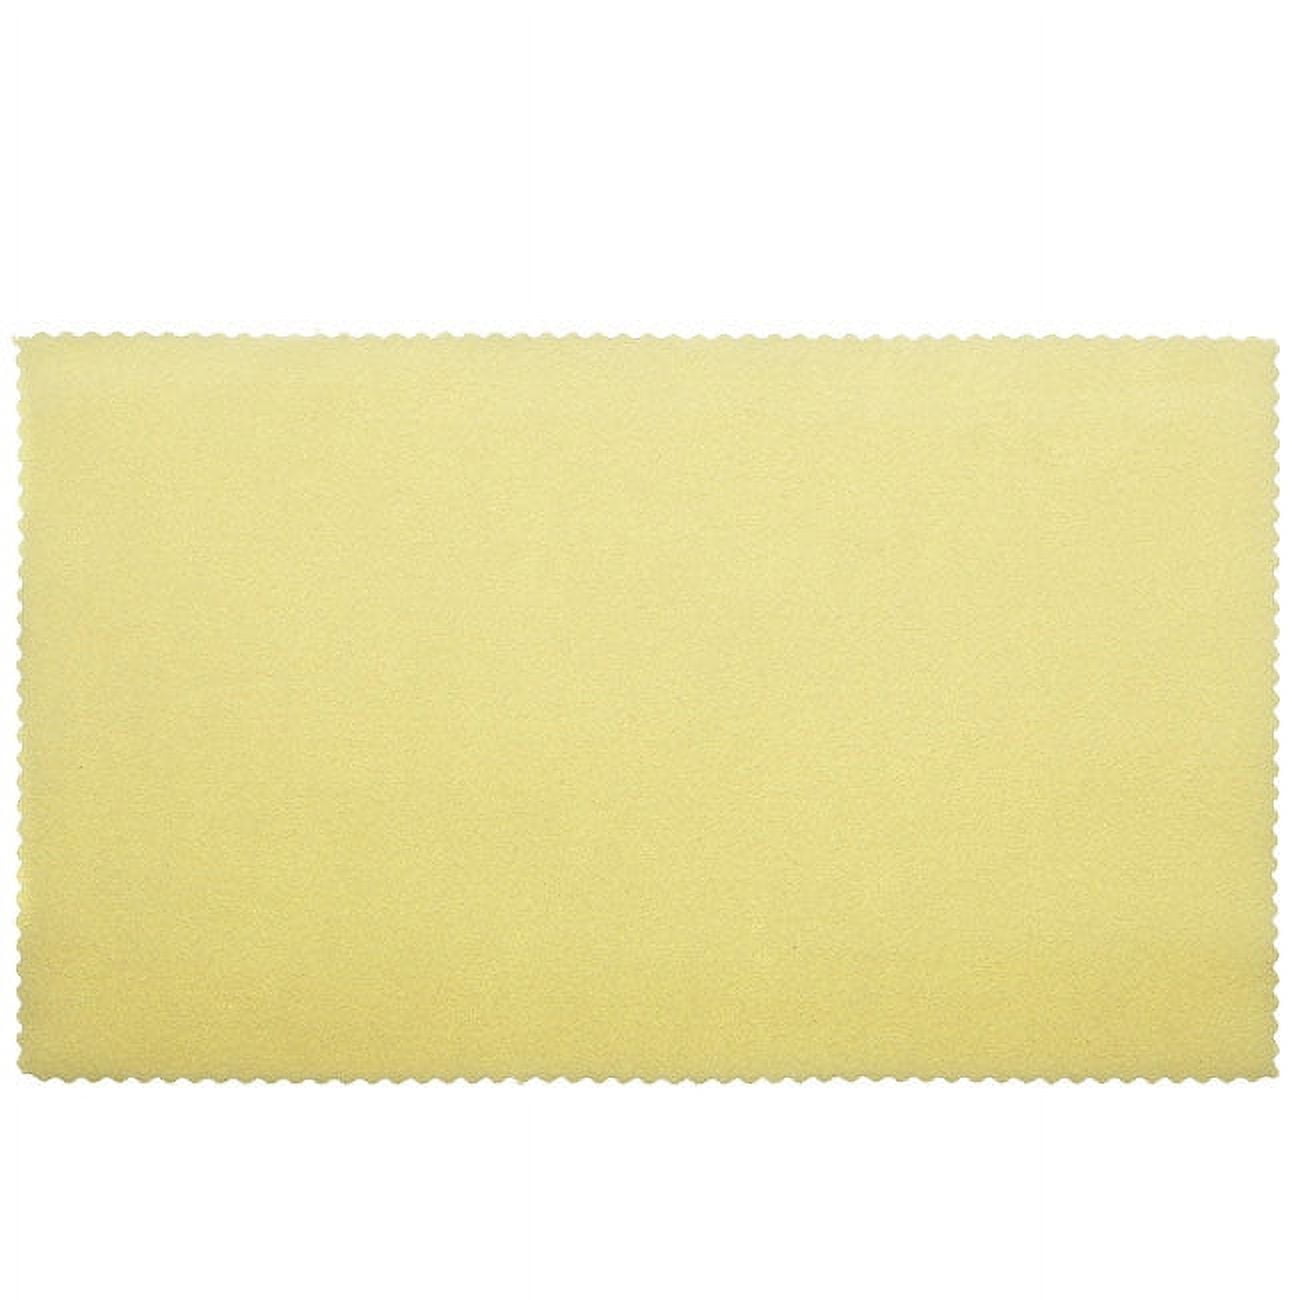 Sunshine Jewelry Polishing Cloth 5x7.5 Inch Yellow Cleaning Cloth for  Buffing Silver, Gold & Copper